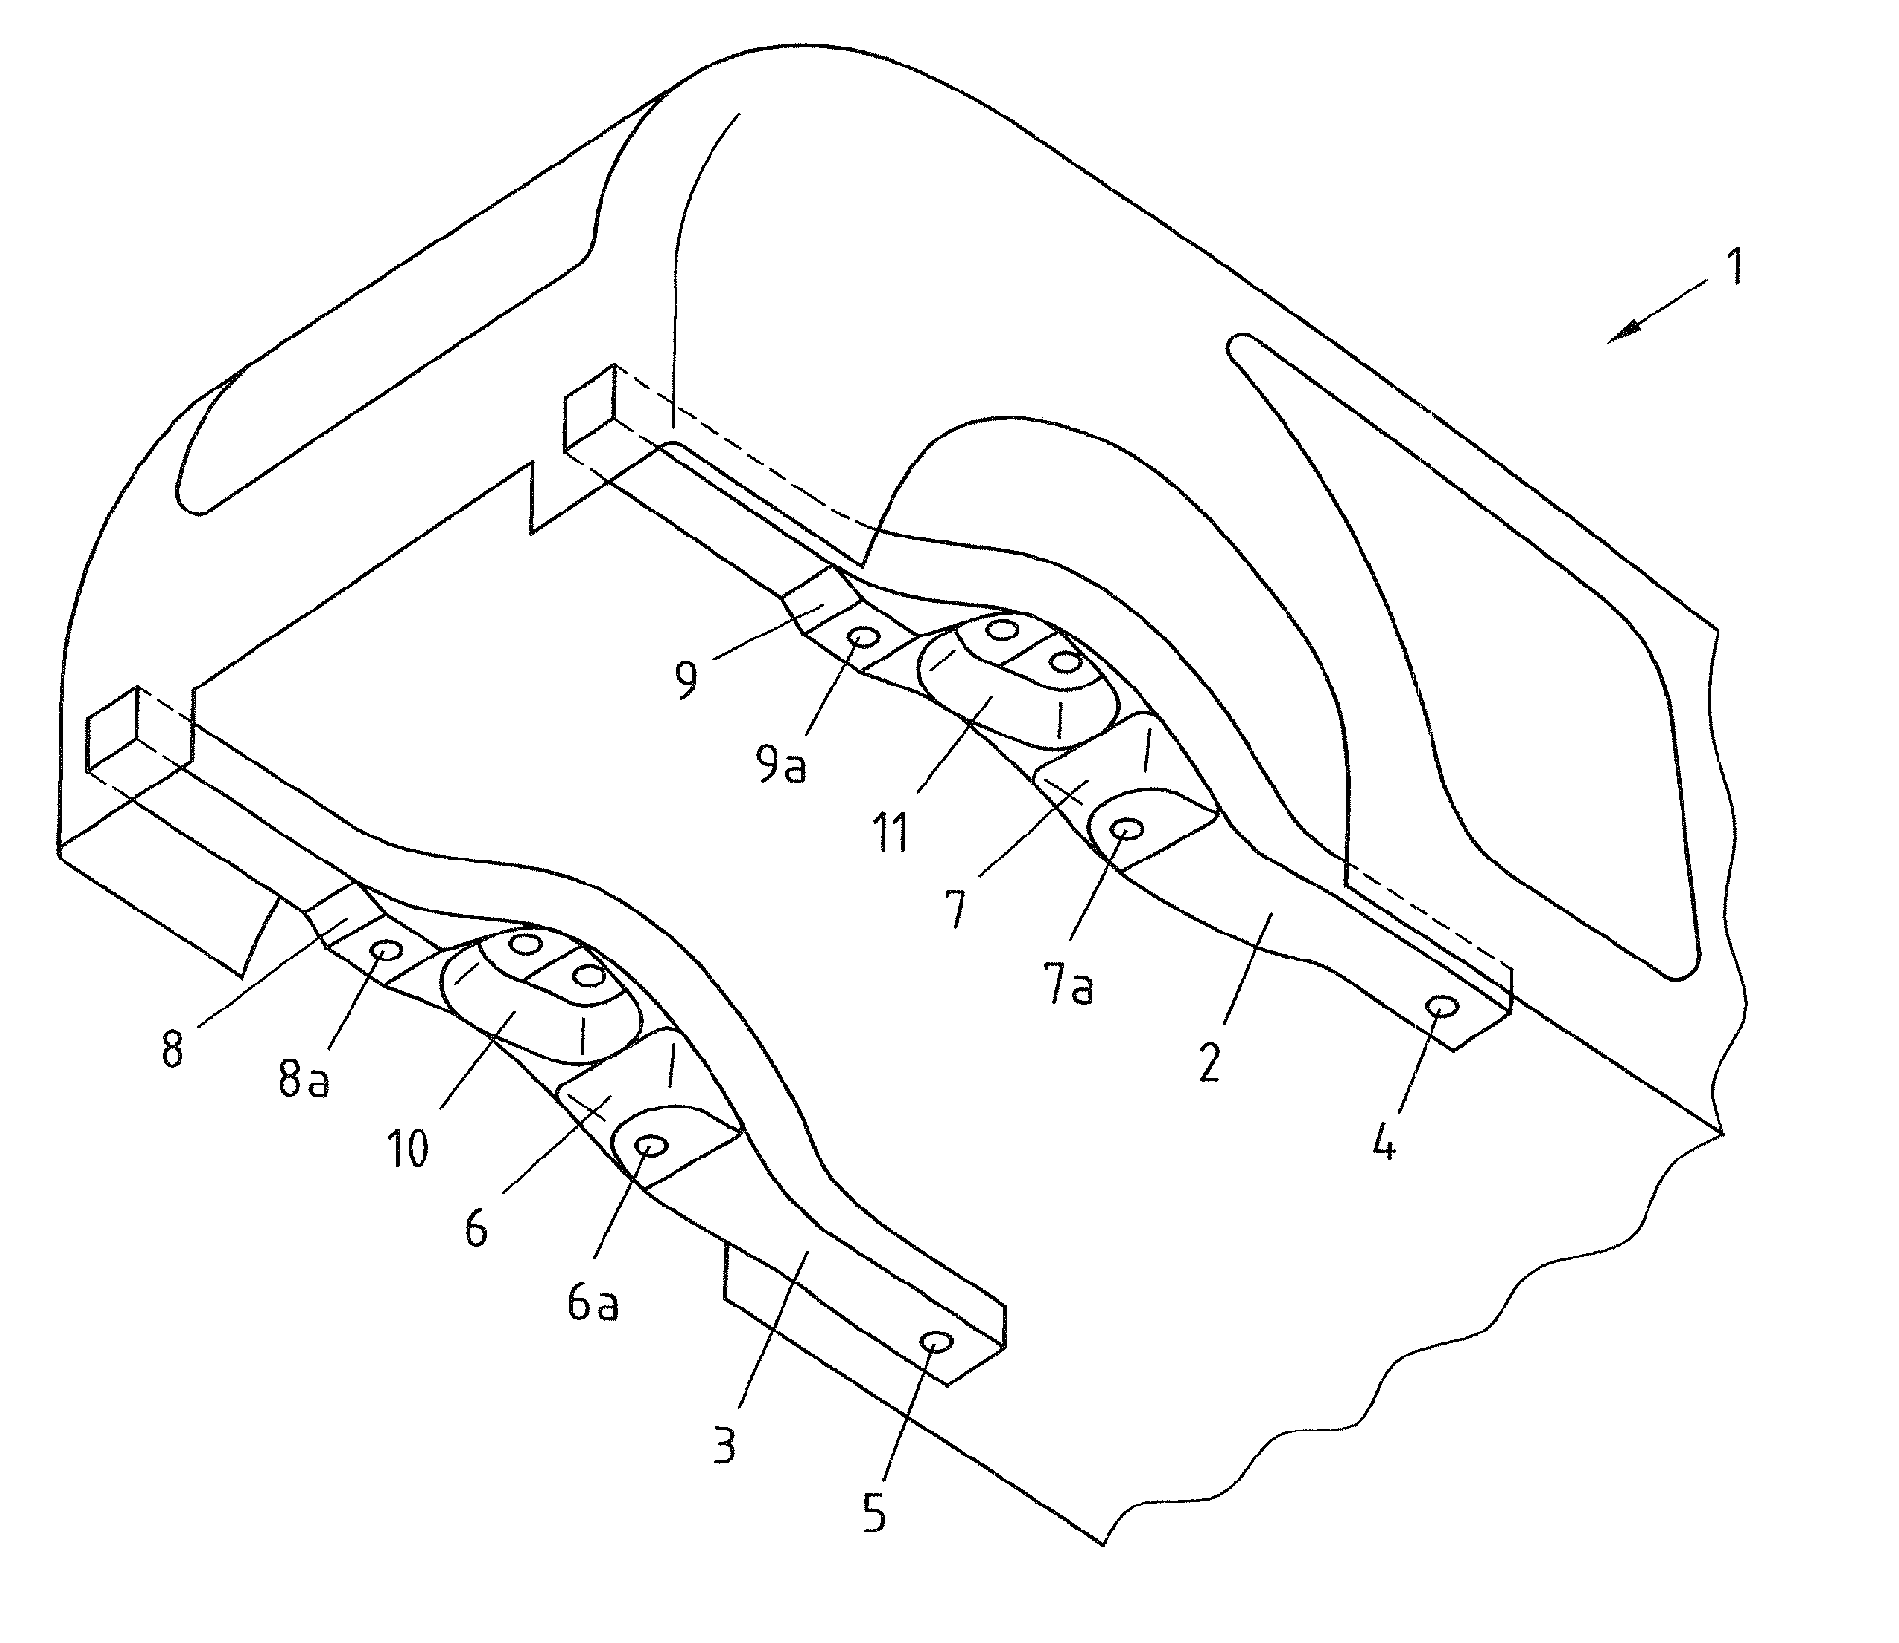 Vehicle chassis having modular rear axle construction